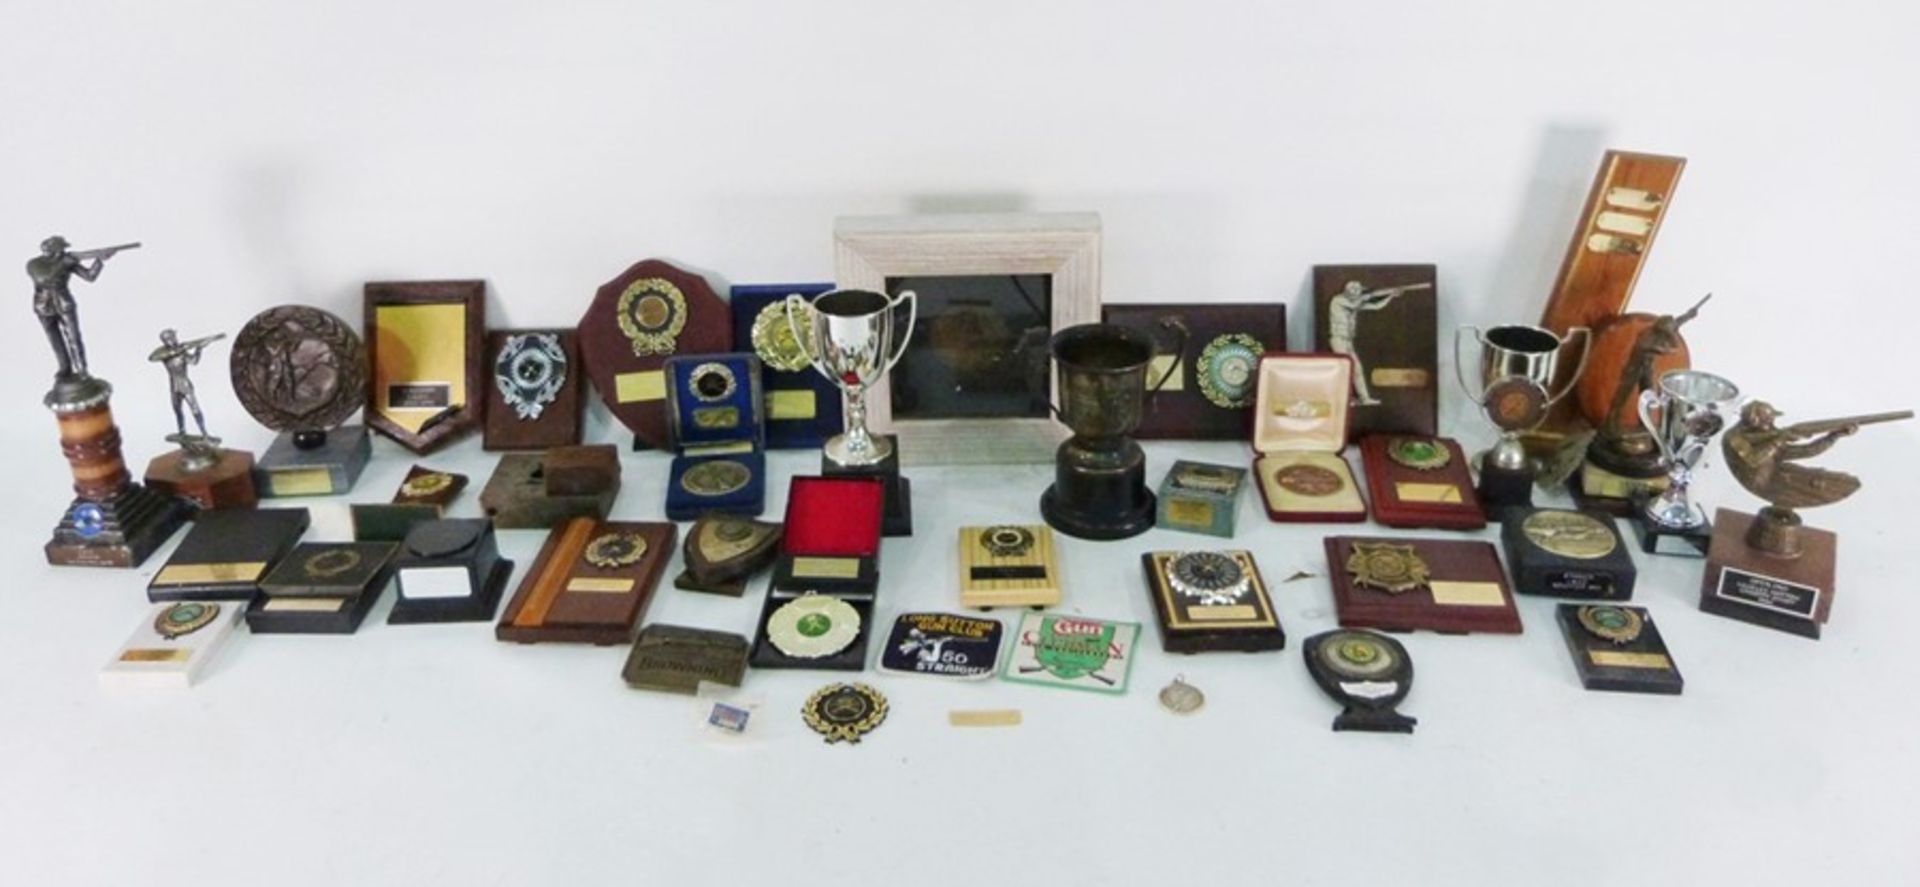 Quantity of trophy cups, trophy prizes for clay pigeon shooting and other sports (1 box)